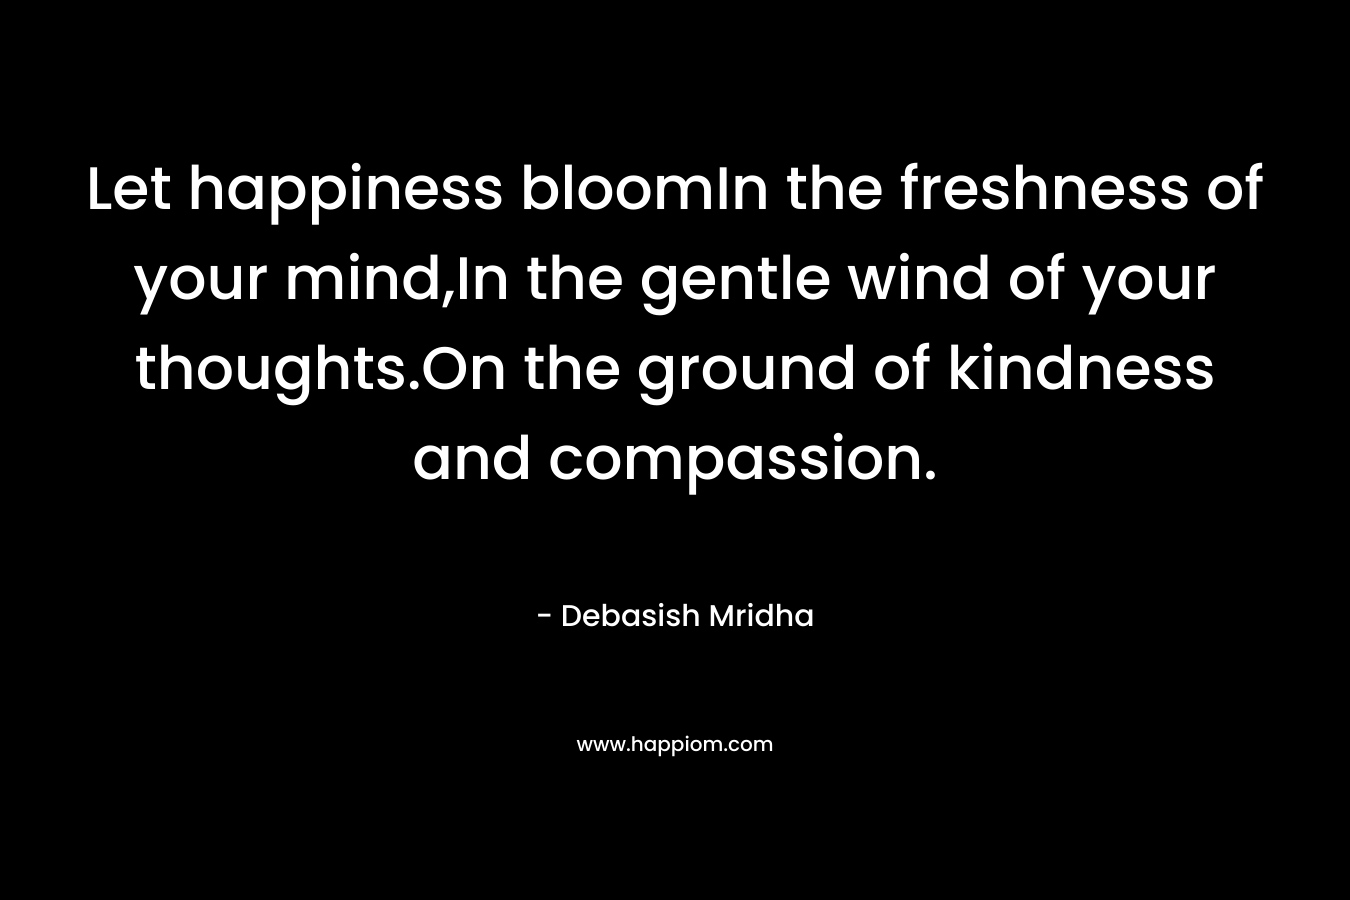 Let happiness bloomIn the freshness of your mind,In the gentle wind of your thoughts.On the ground of kindness and compassion. – Debasish Mridha